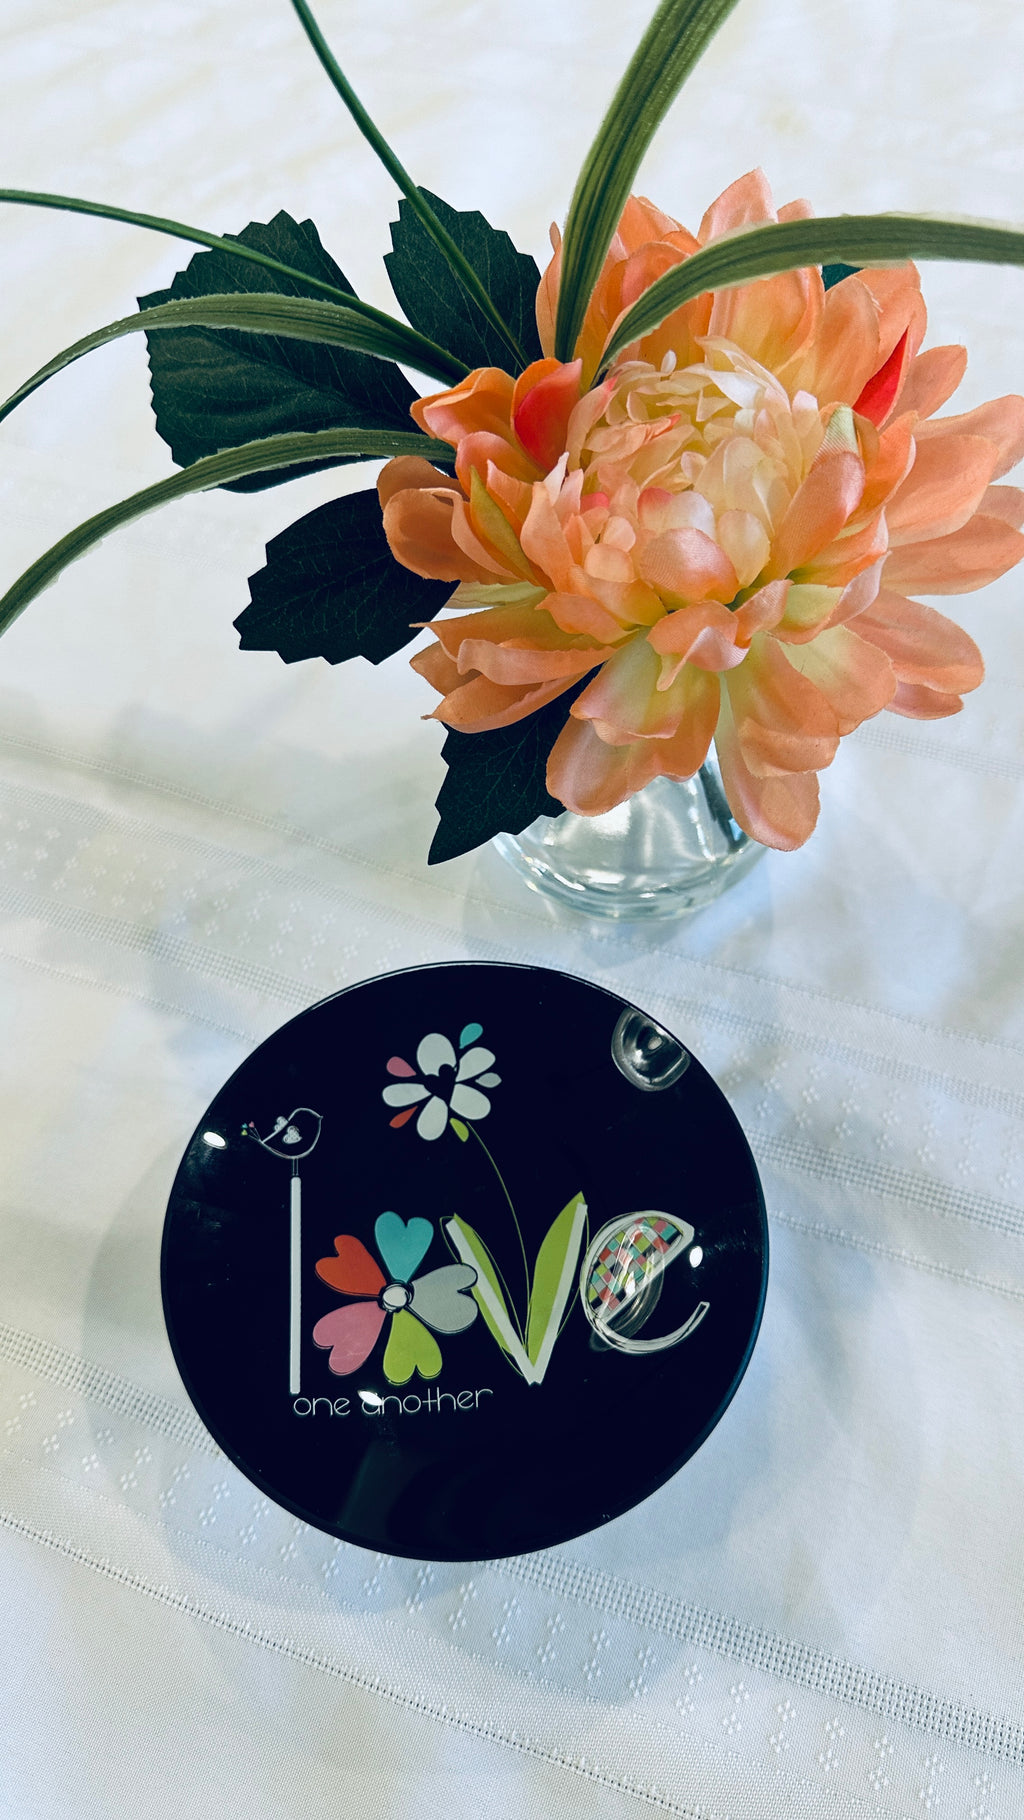 Black "Love One Another" Trinket Dish